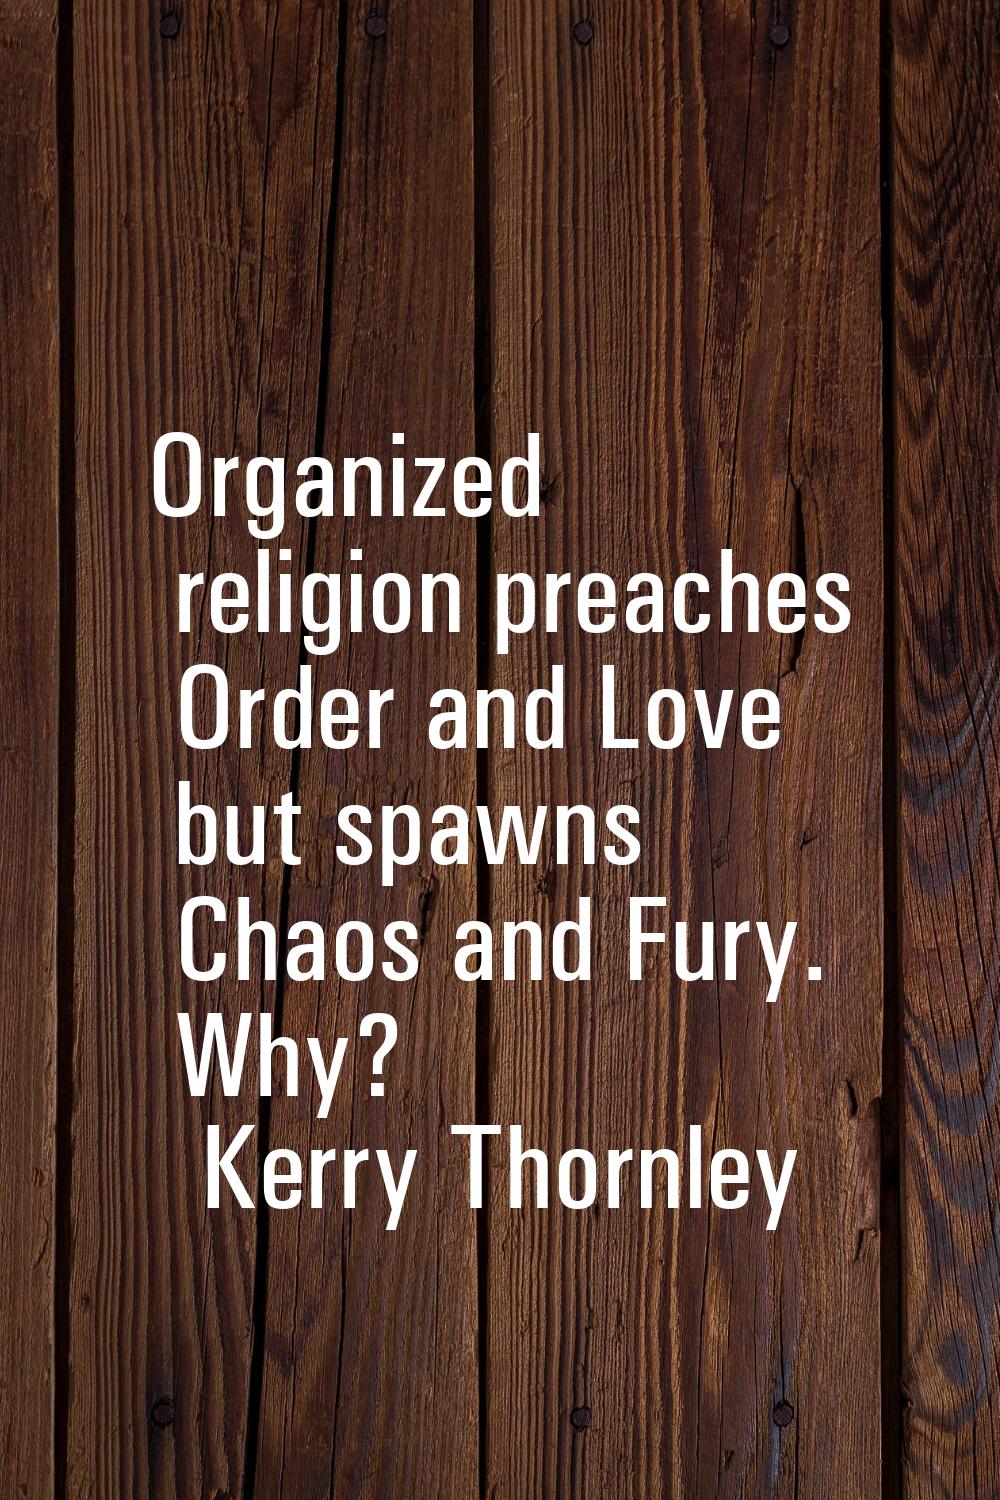 Organized religion preaches Order and Love but spawns Chaos and Fury. Why?